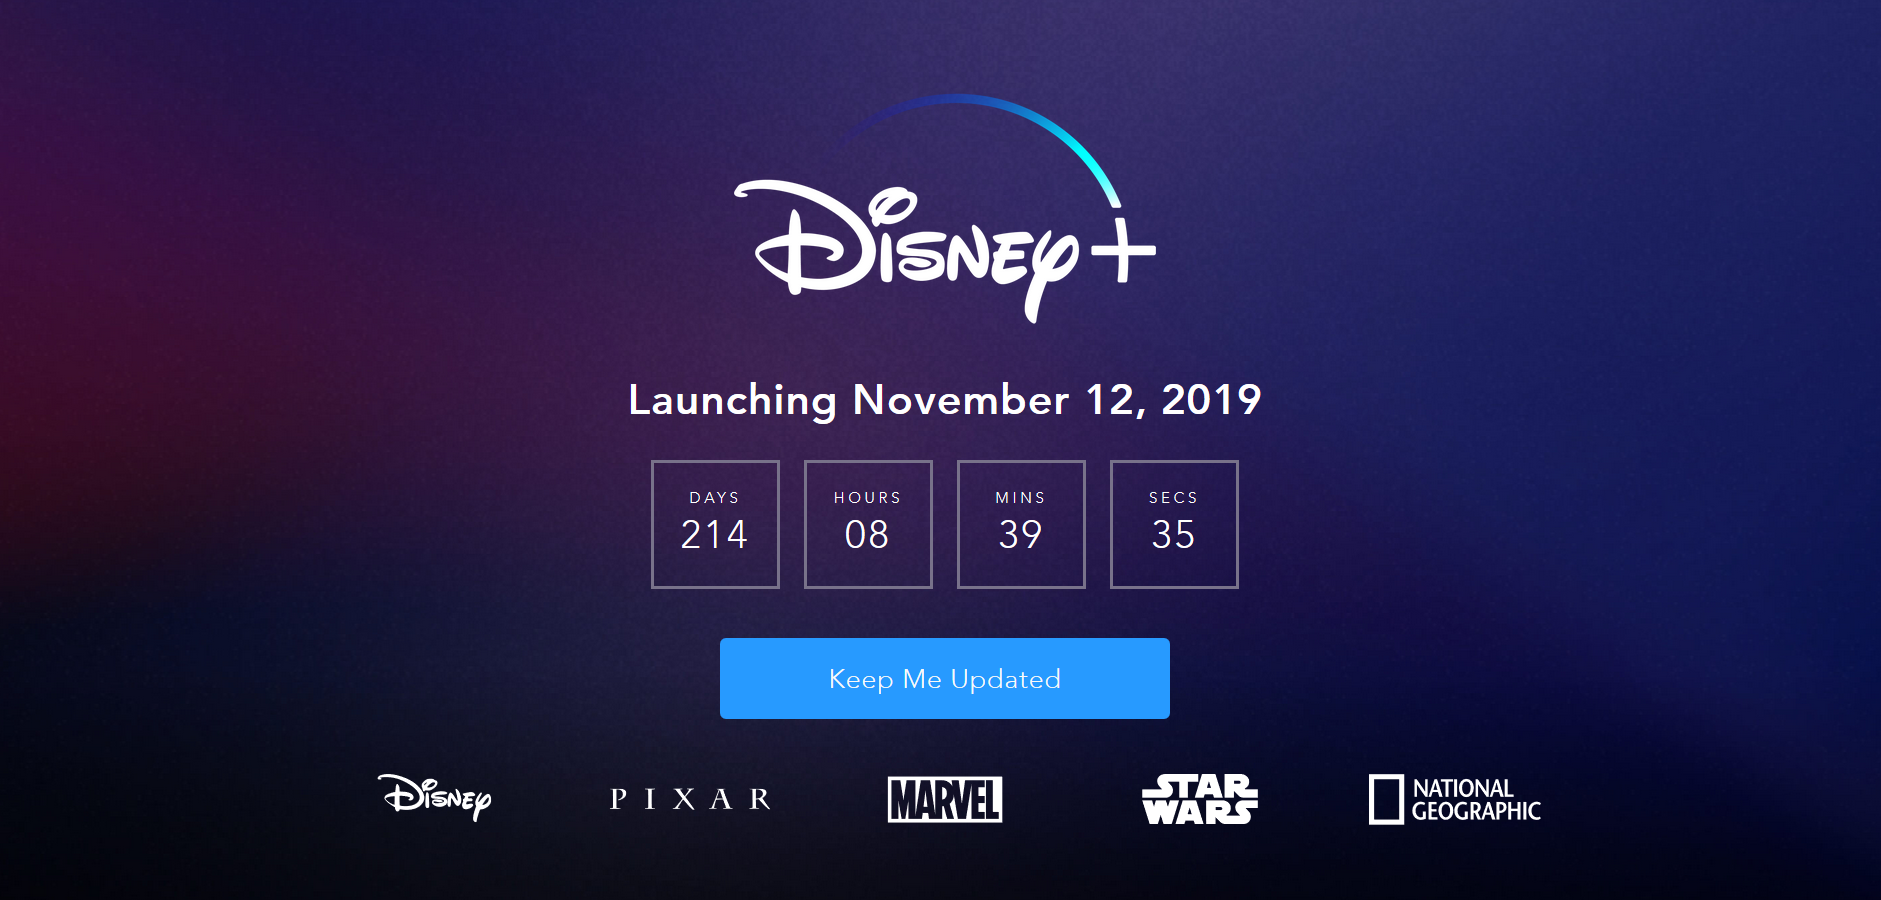 Disney+ will launch on November 12th - Disney&#039;s Netflix competitor to debut November 12th priced at $6.99 per month